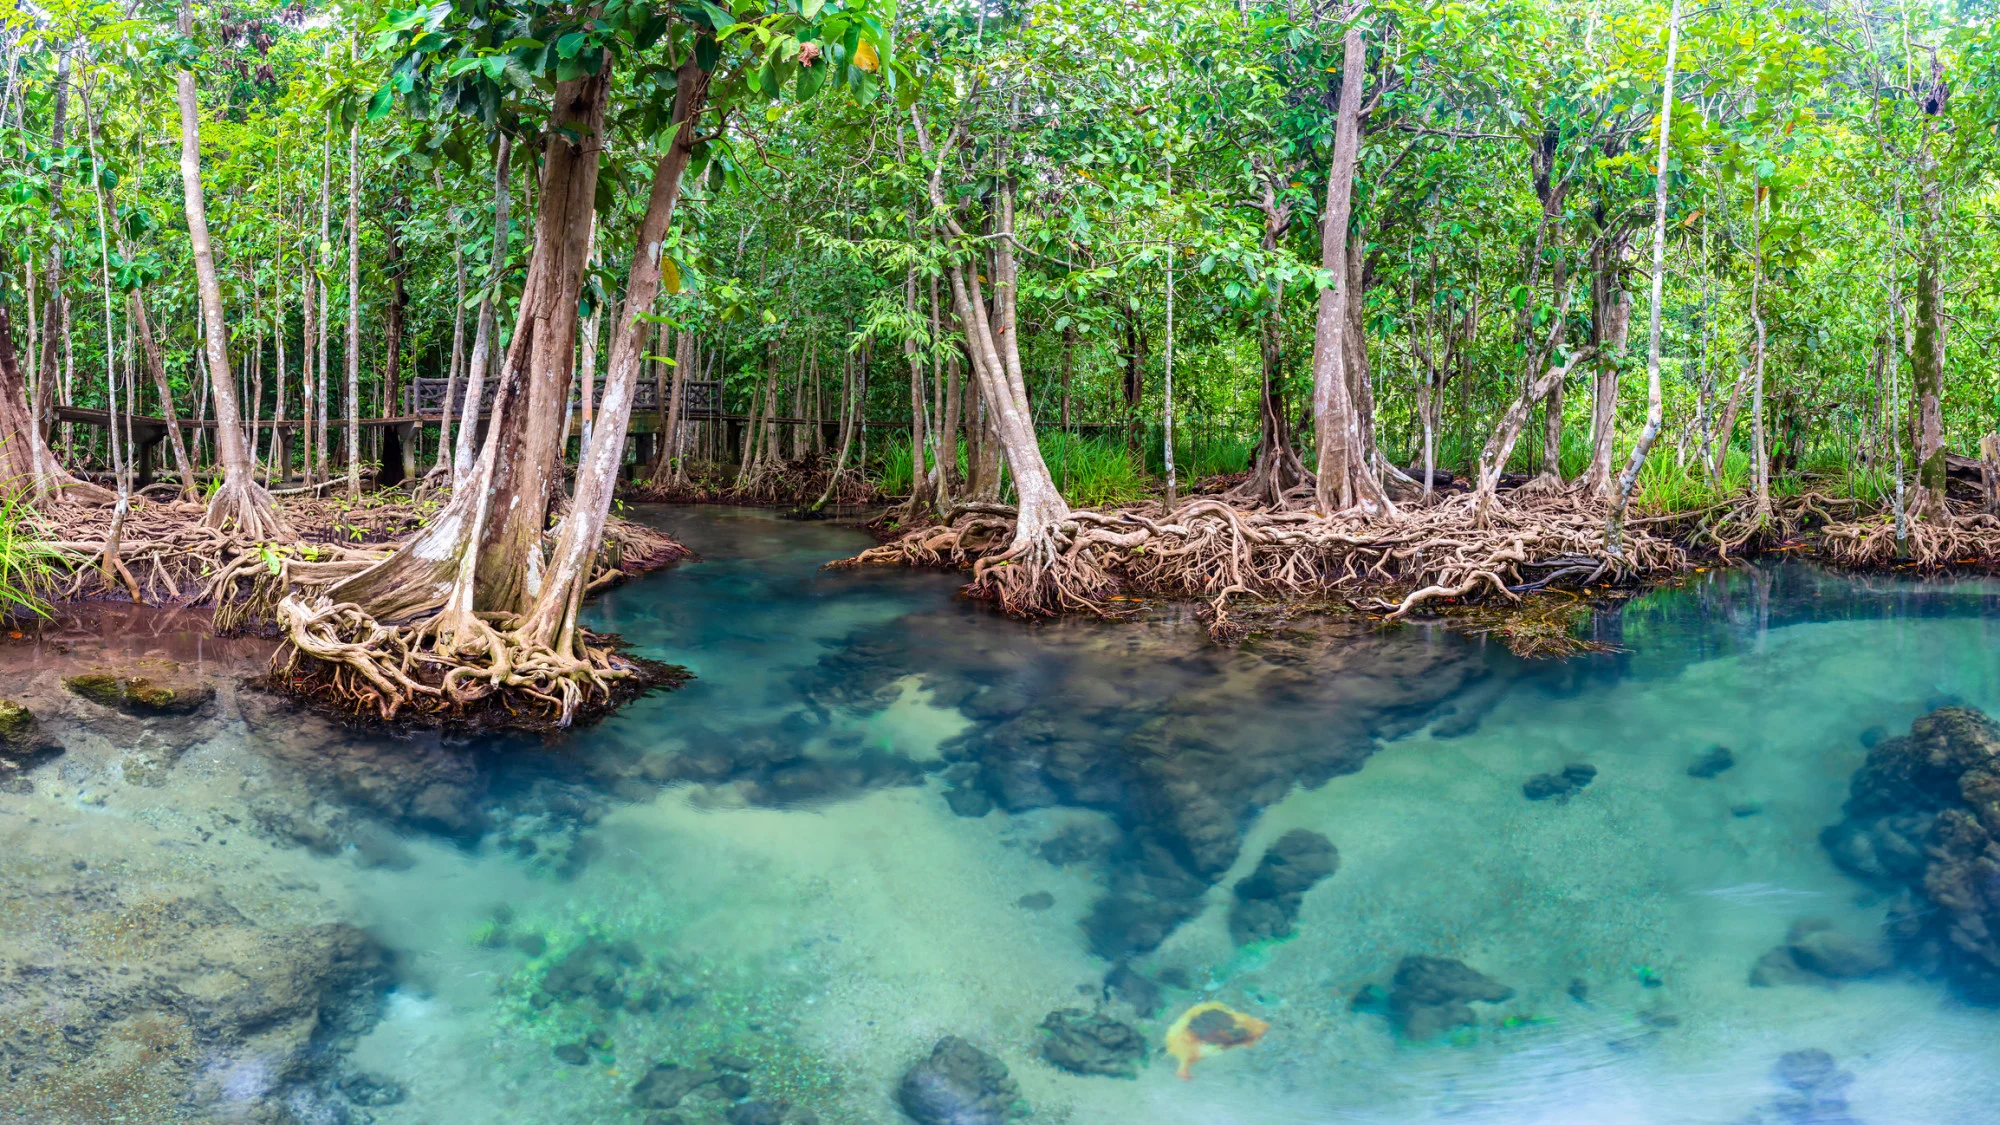 Jungle river in Thapom mangrove forest, Krabi, Thailand. Credit:  Pakin Songmor. Moment. Getty Images